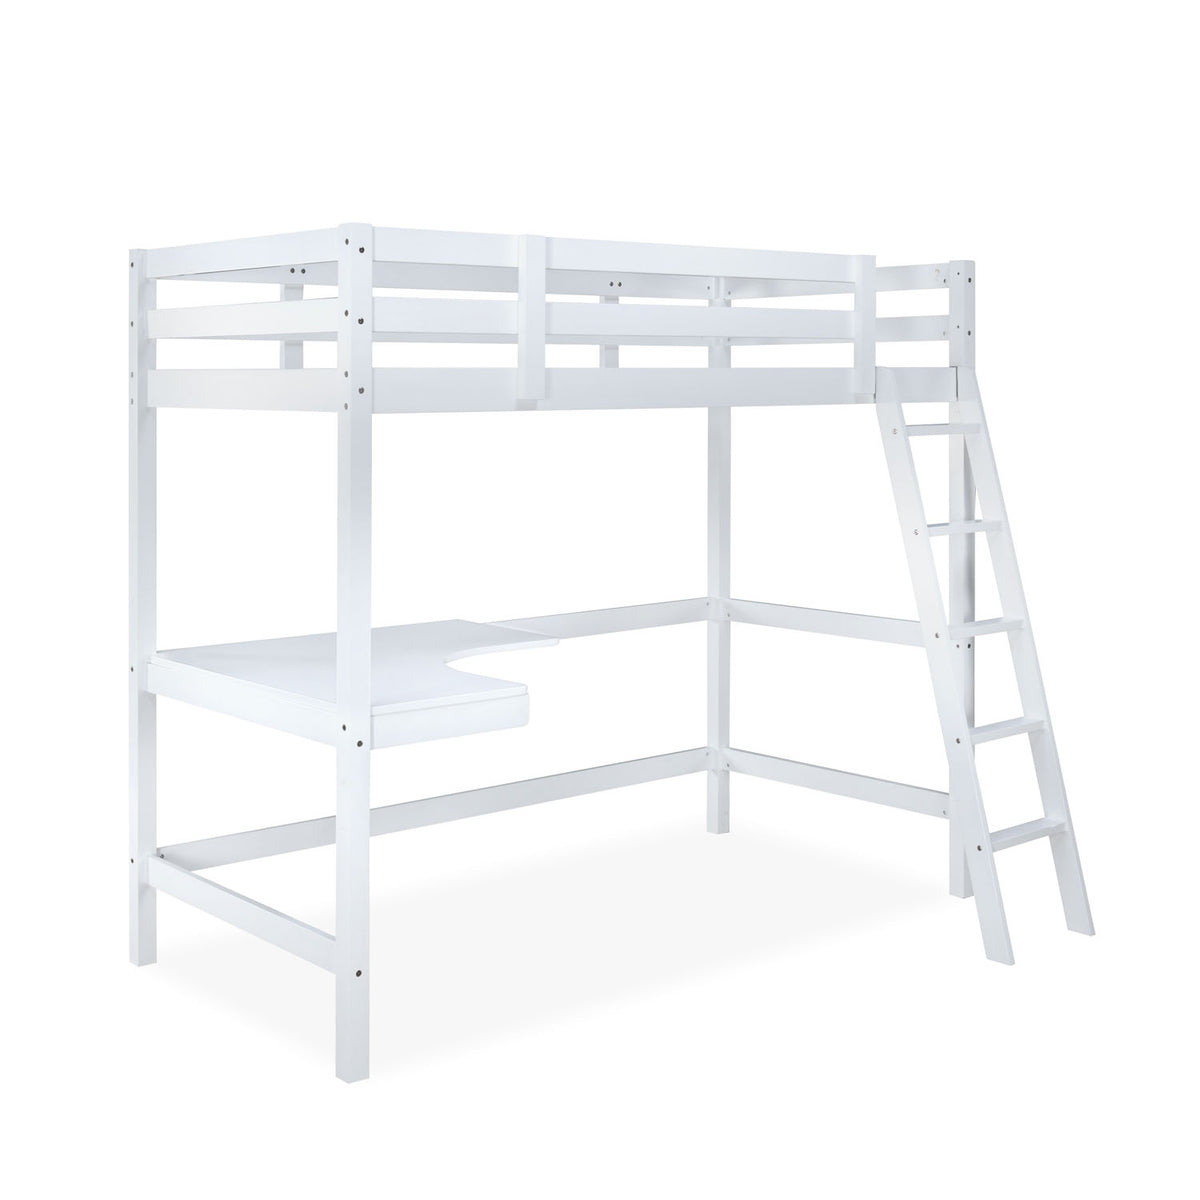 Genius Solid Wood Bunk Bed With Study Table (White)| At-home | Nilkamal ...